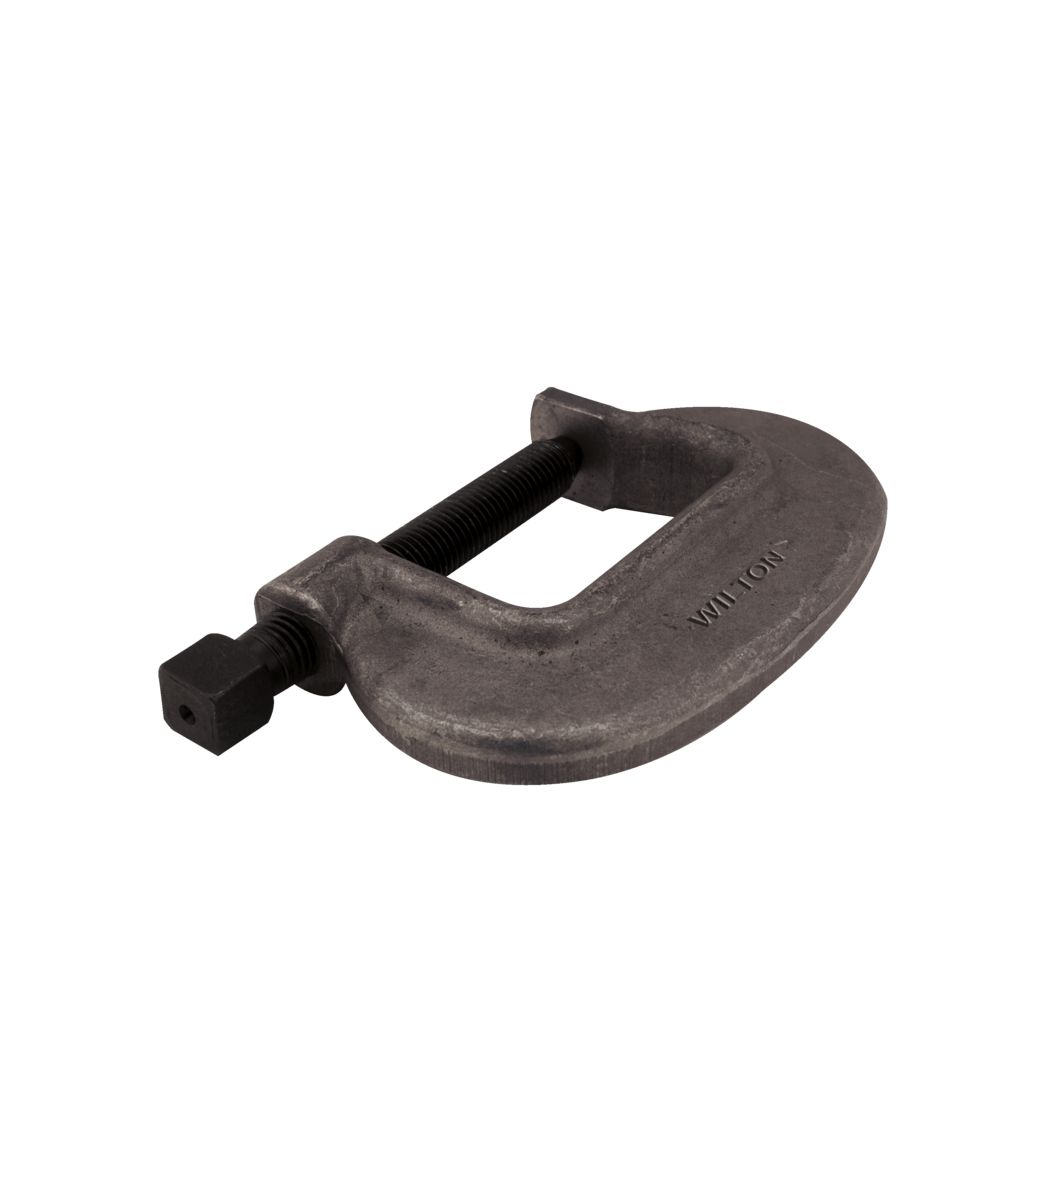 WILTON 6-FC, Brute Force O-Series C-Clamp, 6-7/16" Jaw Opening, 3-1/2" Throat